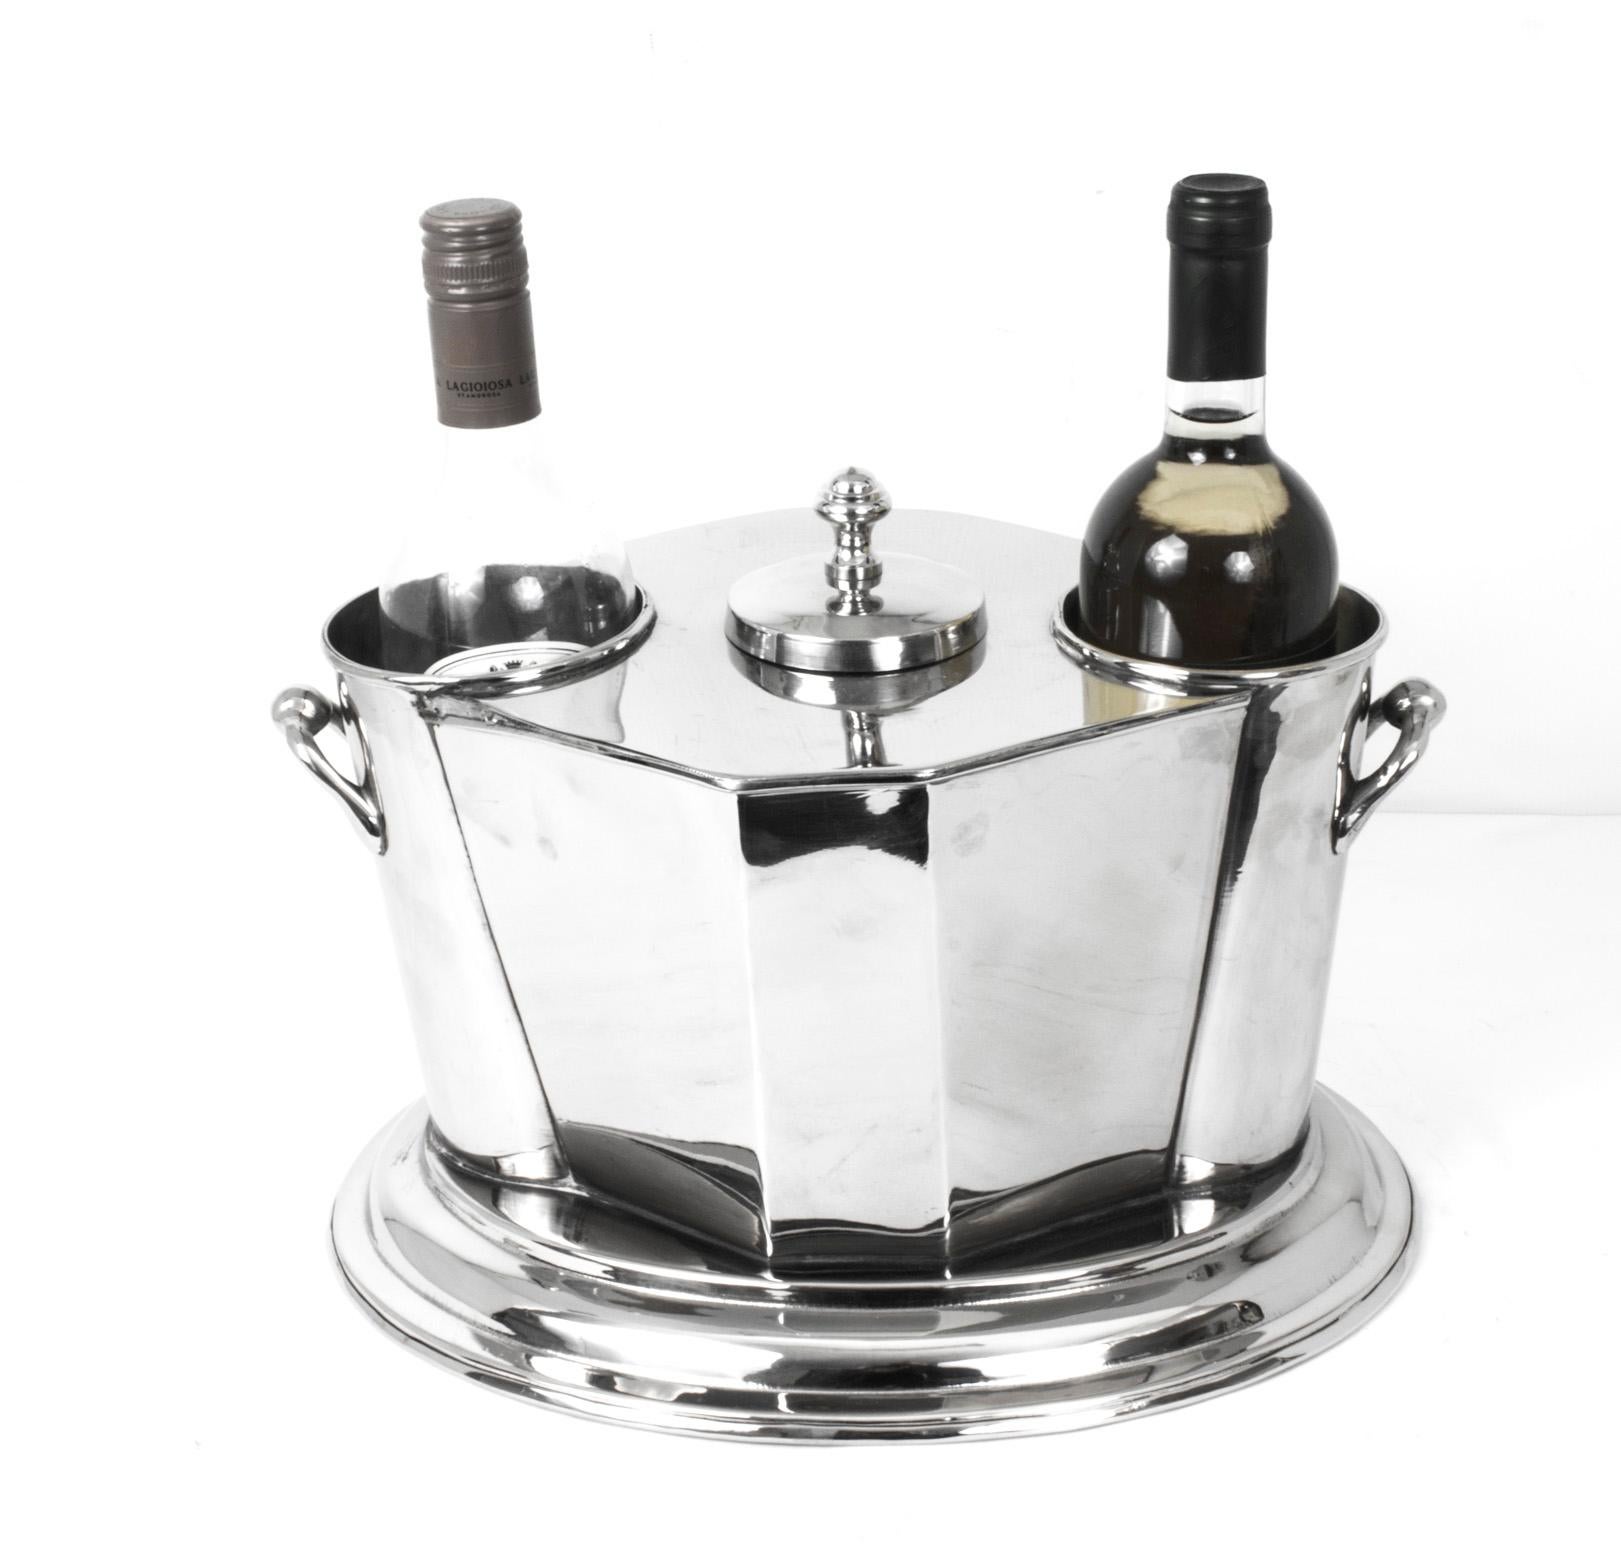 This is a beautiful silver plated wine cooler in elegant Art Deco style.

A lidded section for crushed ice sits between the two crafted bottle compartments, making sure your bottles are at the perfect serving temperature.

This wine cooler is